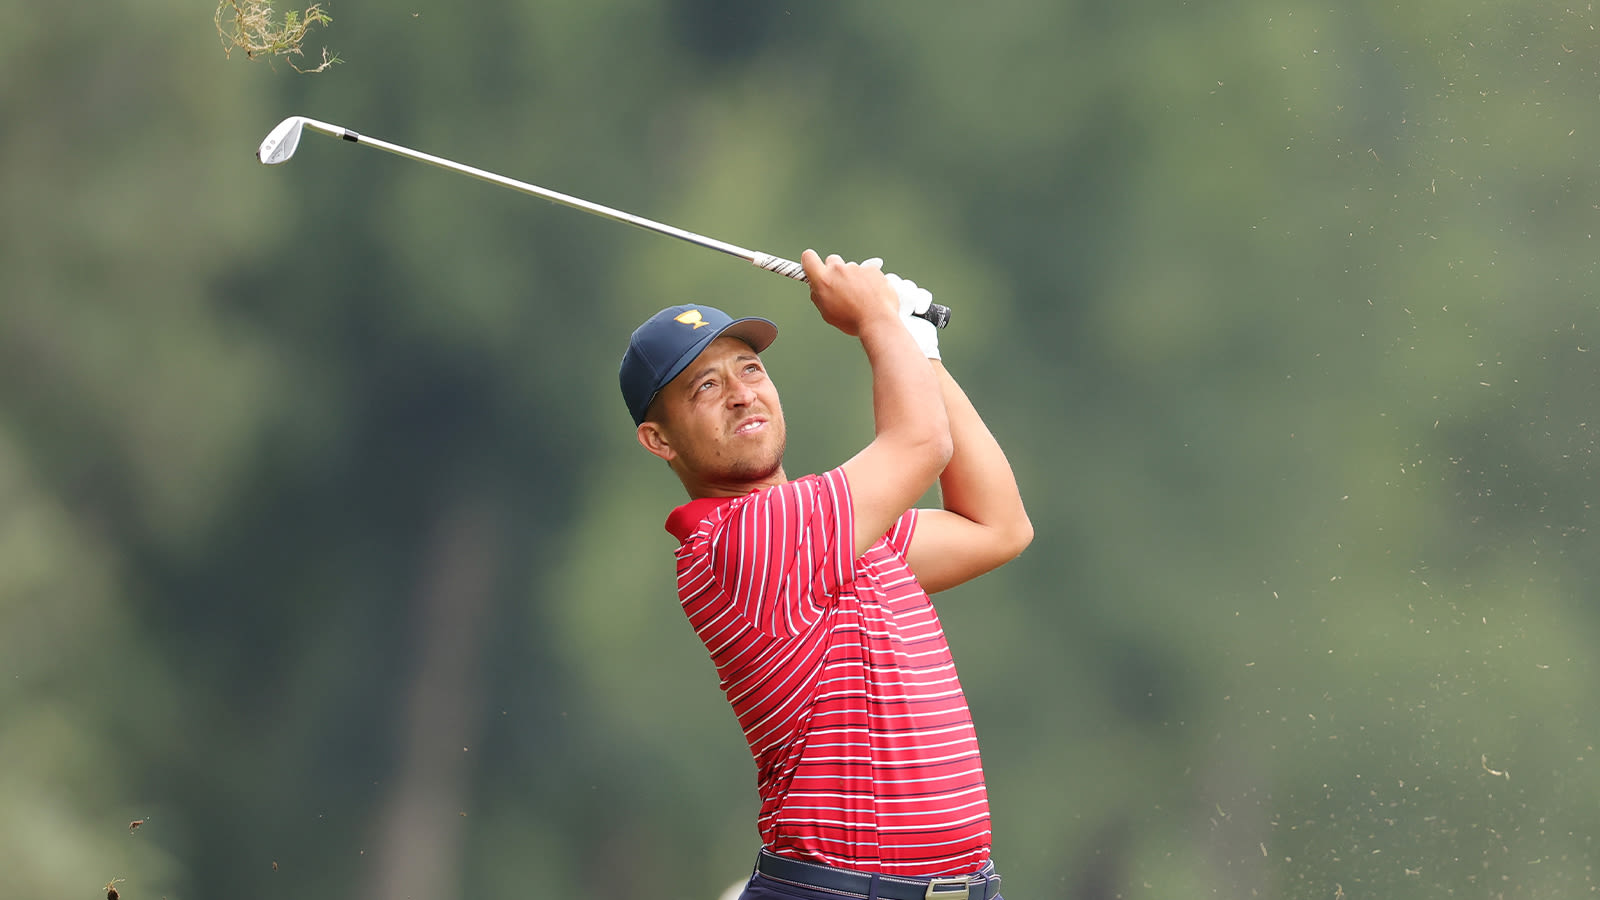 Xander Schauffele of the United States Team plays a second shot on the second hole during Sunday singles matches on day four of the 2022 Presidents Cup at Quail Hollow Country Club on September 25, 2022 in Charlotte, North Carolina. (Photo by Stacy Revere/Getty Images)